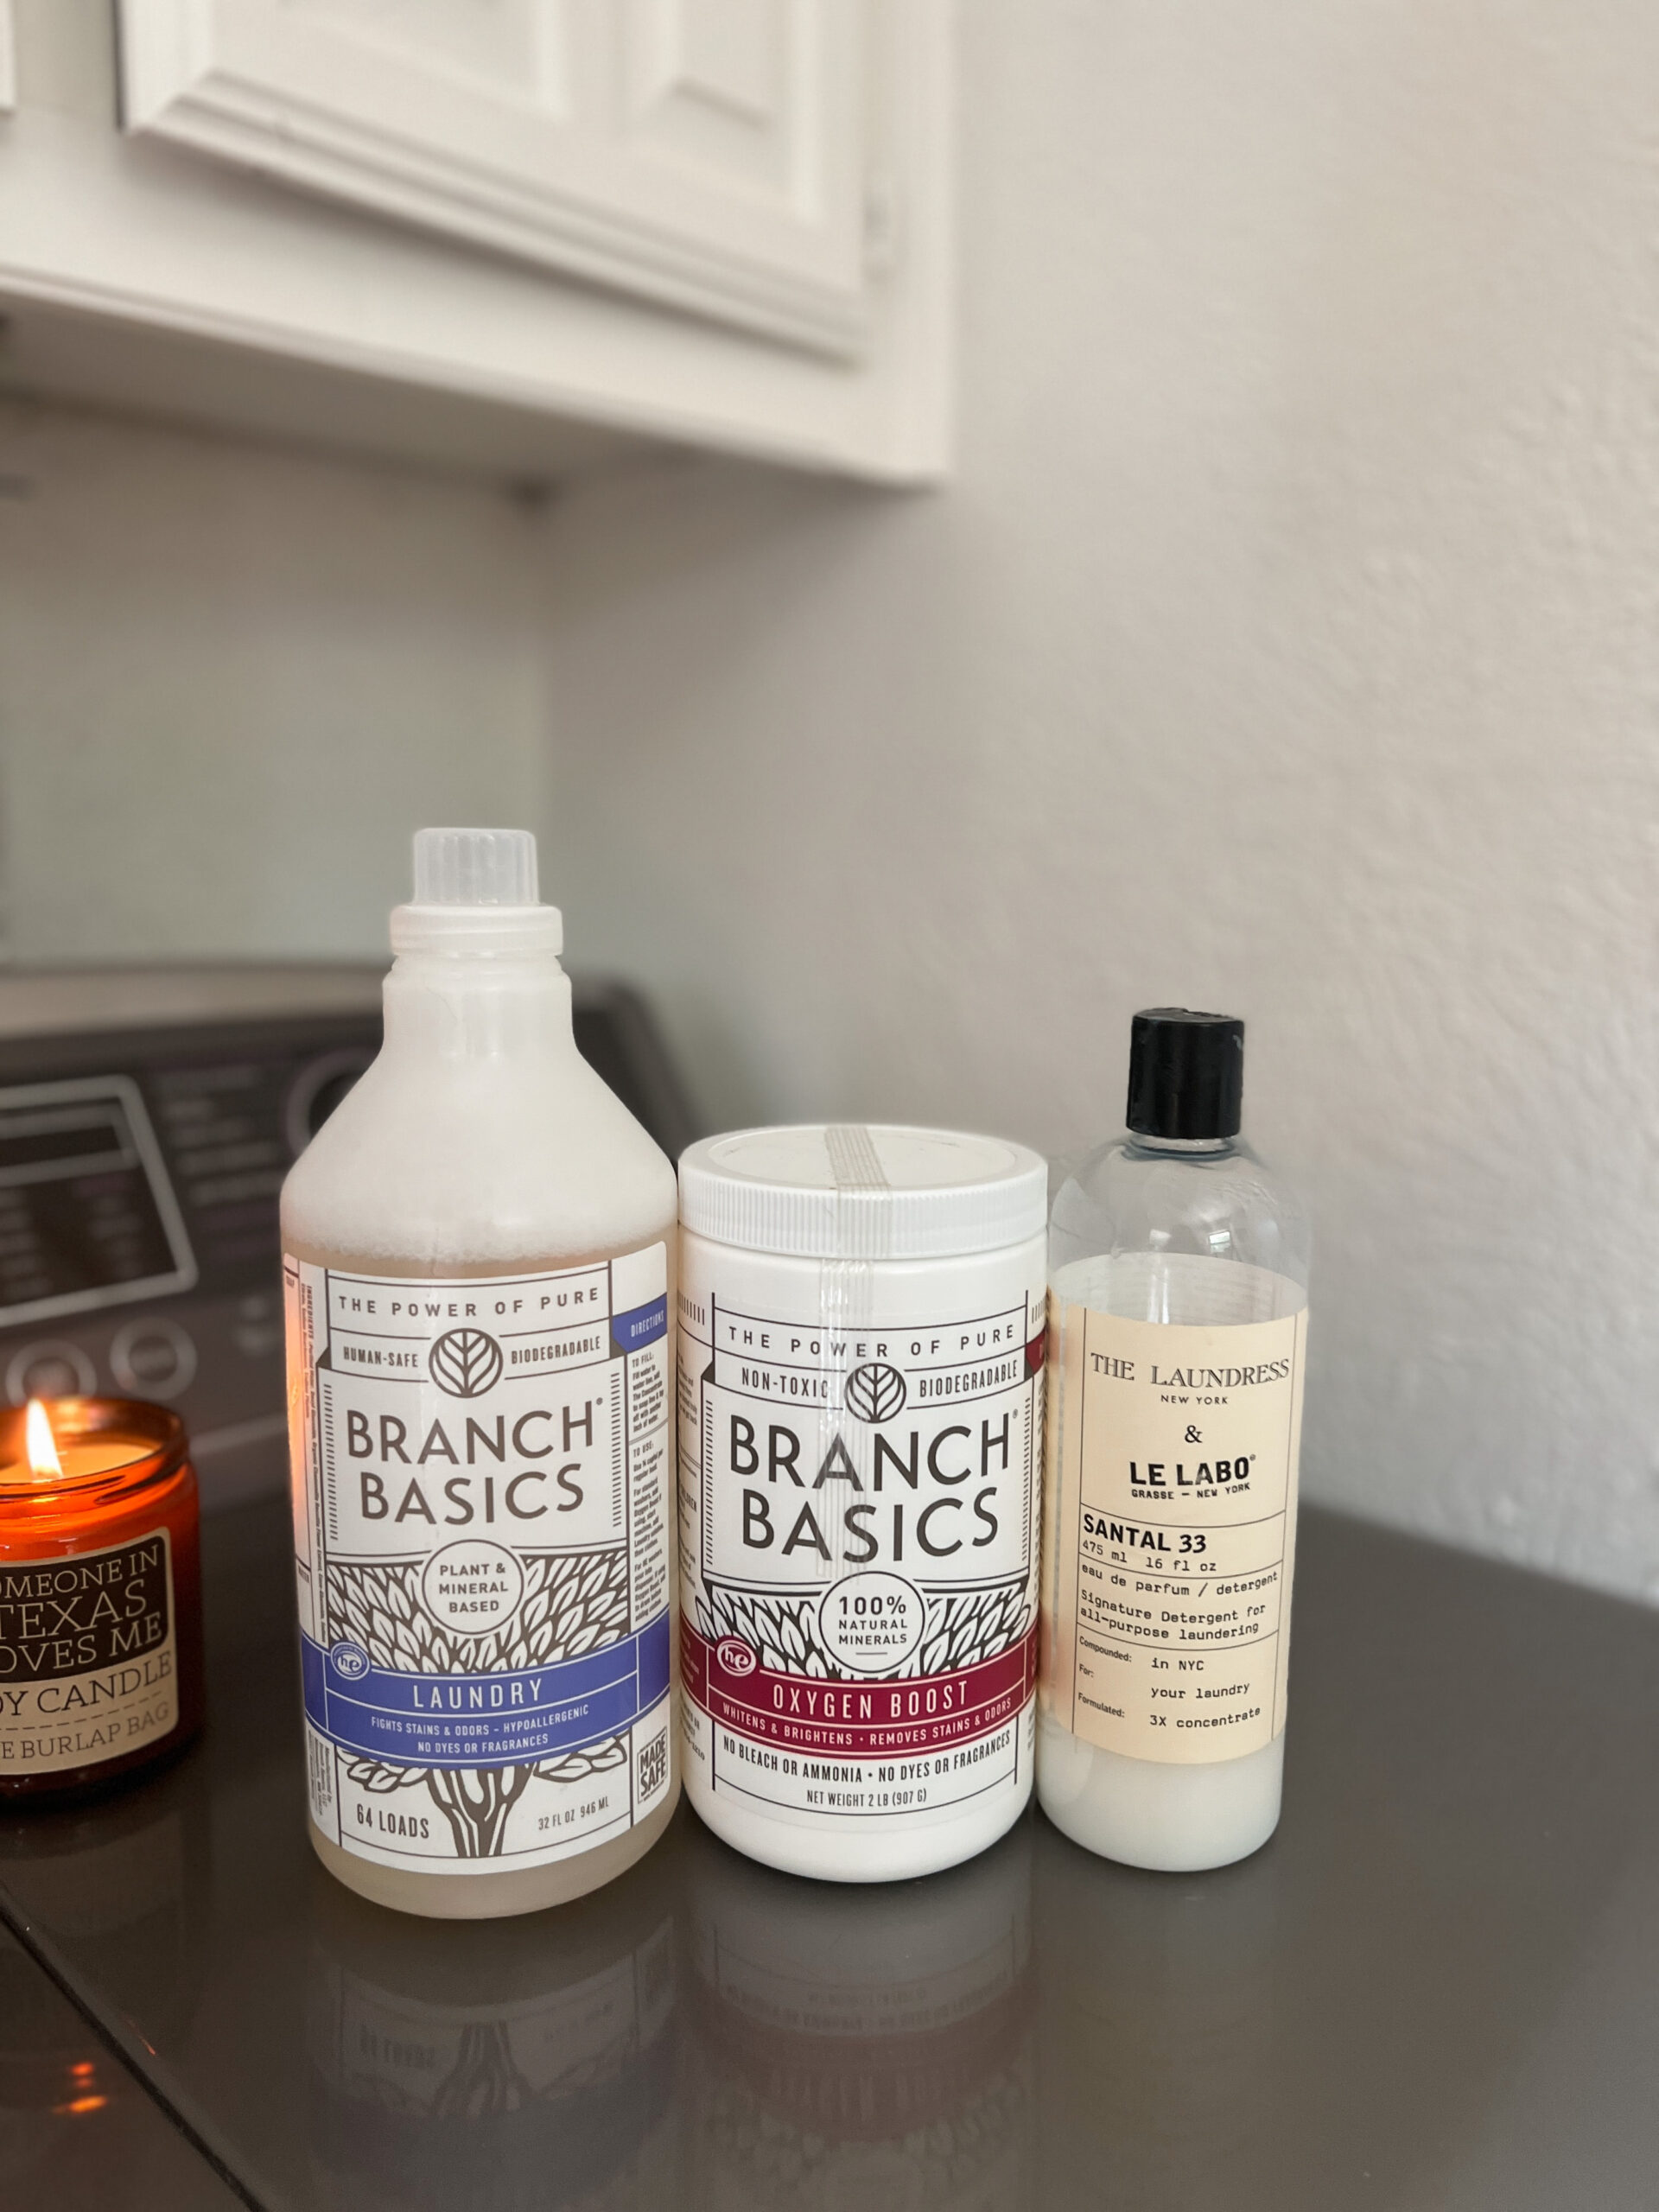 Non Toxic Cleaning and Laundry Supplies I Love in my Household